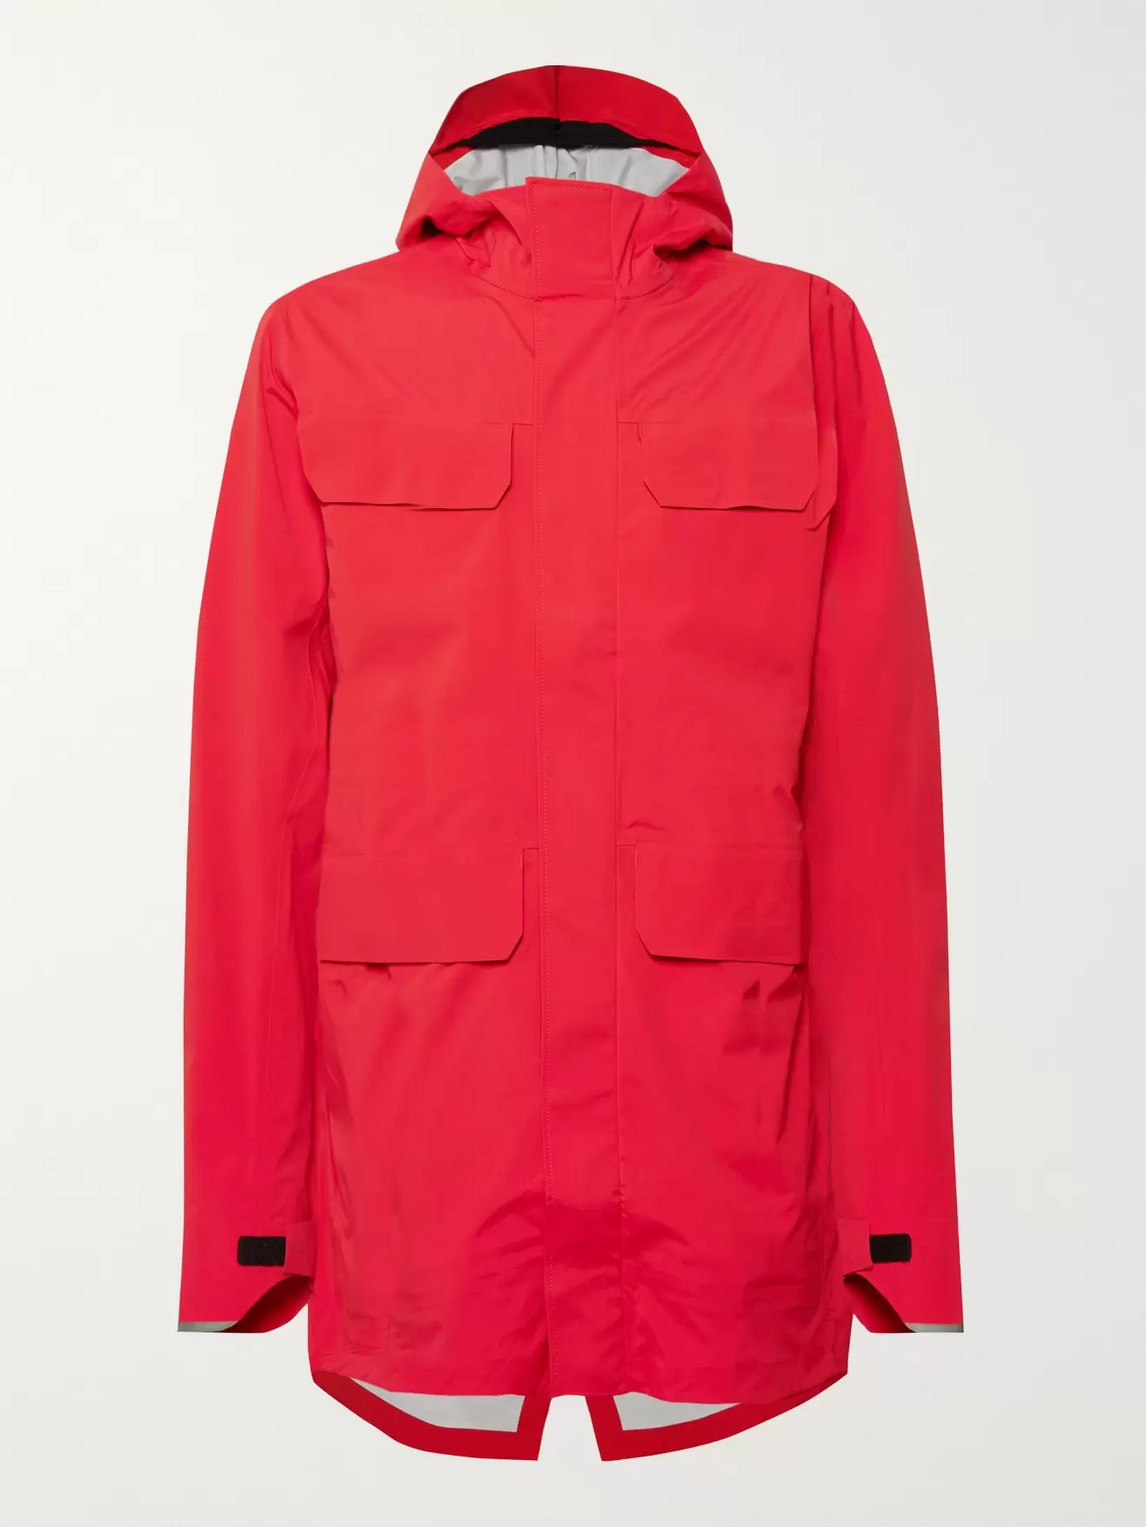 CANADA GOOSE SEAWOLF TRI-DURANCE SHELL HOODED JACKET